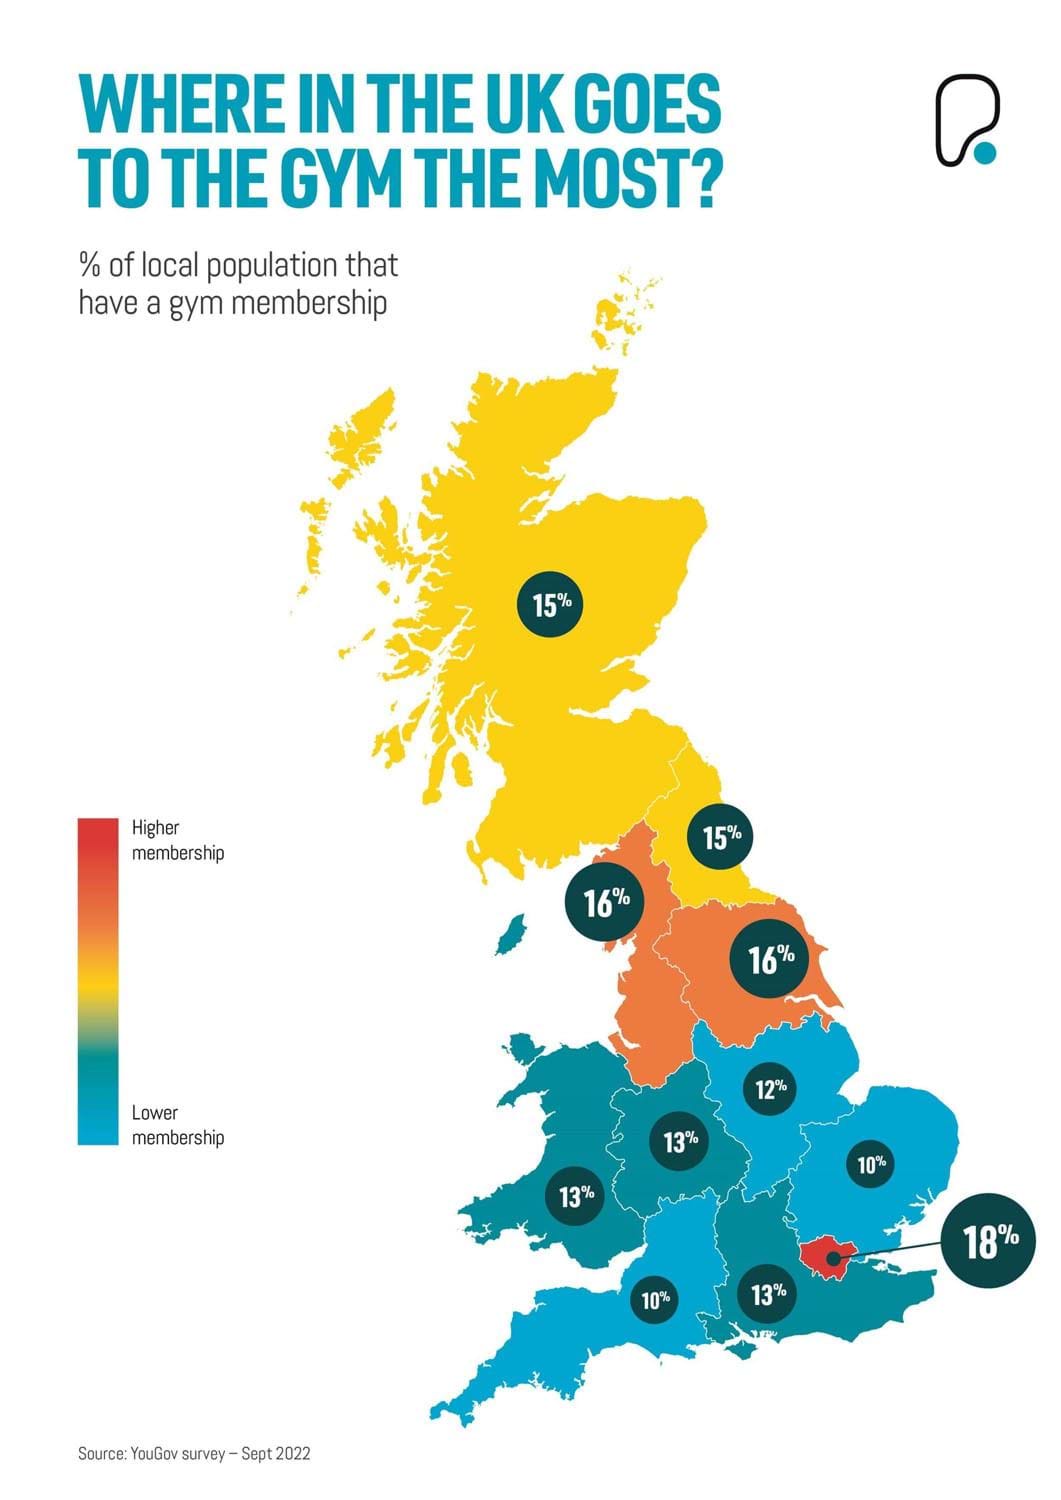 Where in the UK goes to the gym the most?